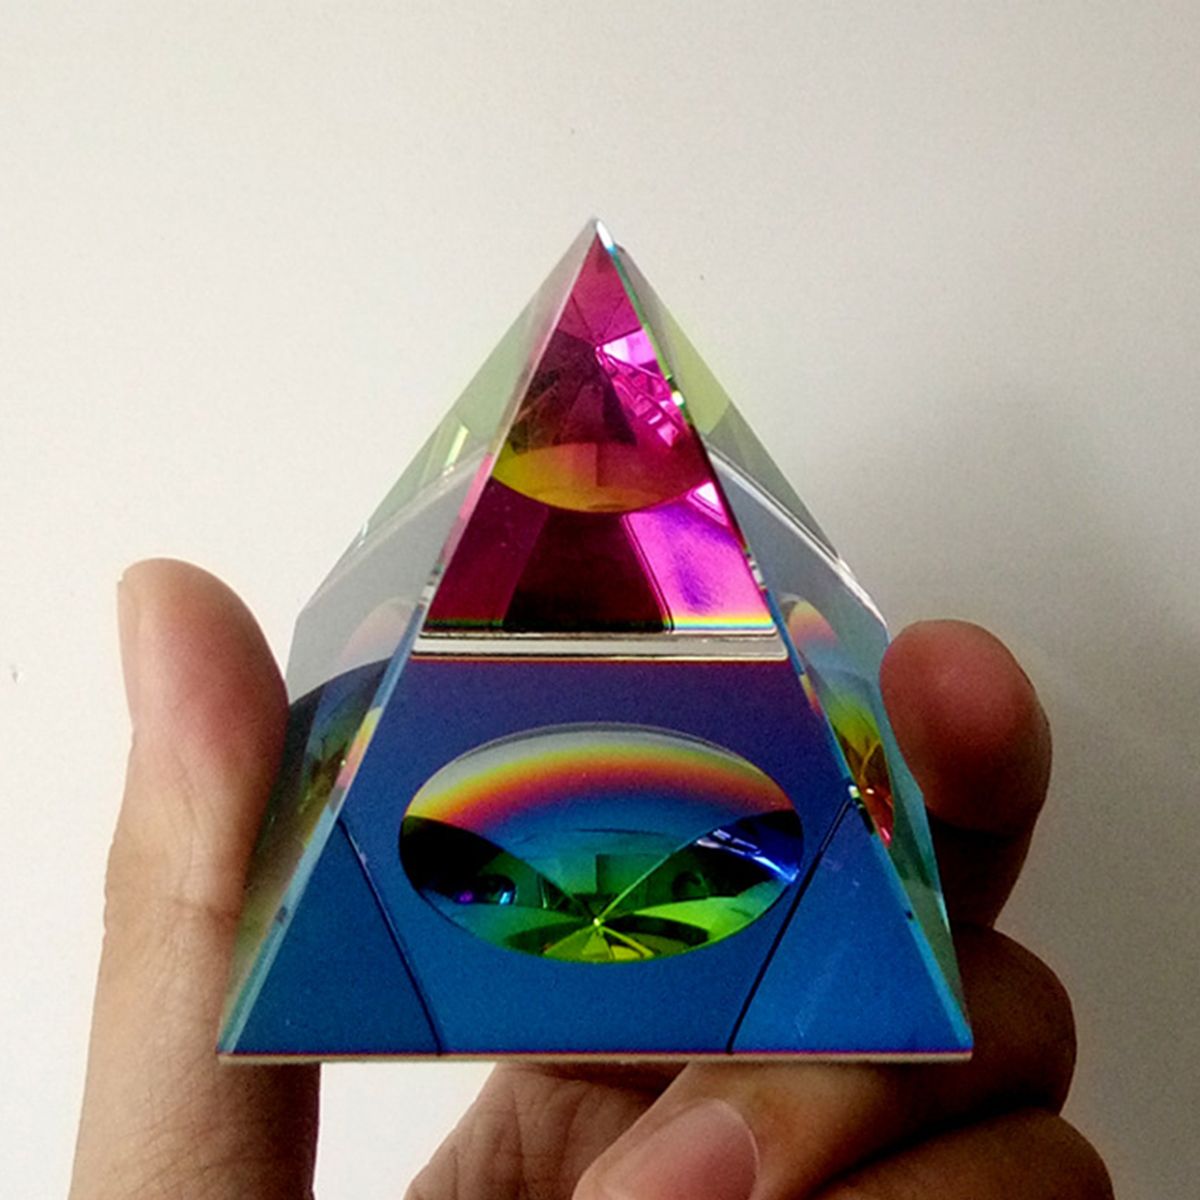 6cm-Crystal-Iridescent-Pyramid-Prism-Rainbow-Color-Home-Decor-FengShui-Reiki-Healing-Decorations-1382162